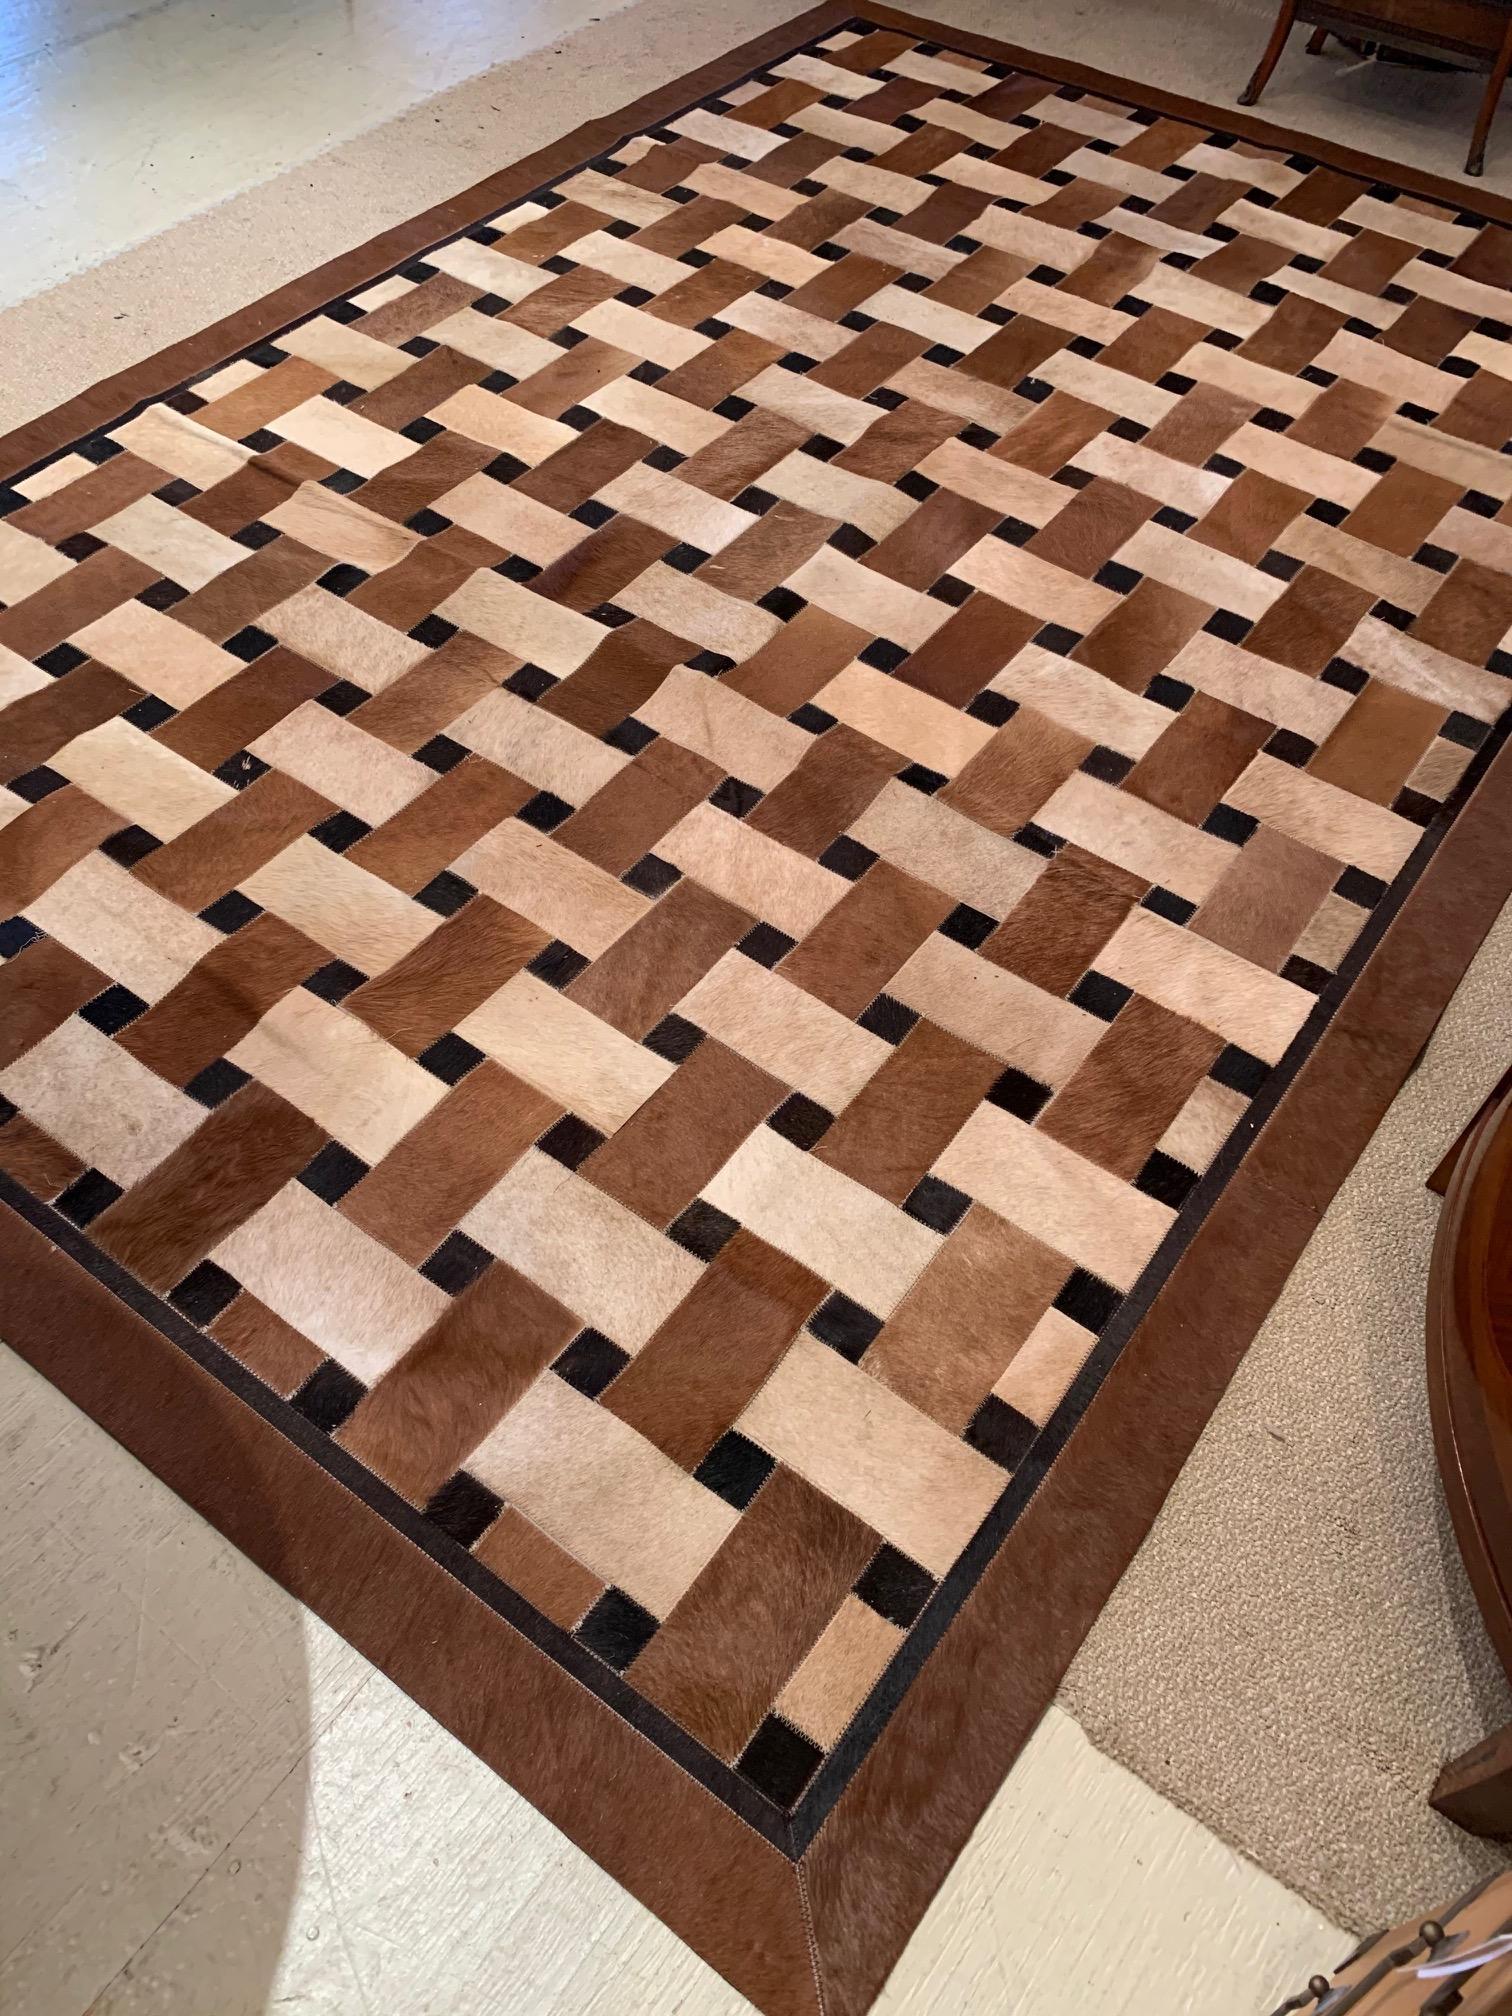 A great looking cowhide area rug in brown, cream and black that has a woven or patchwork geometric design.
  